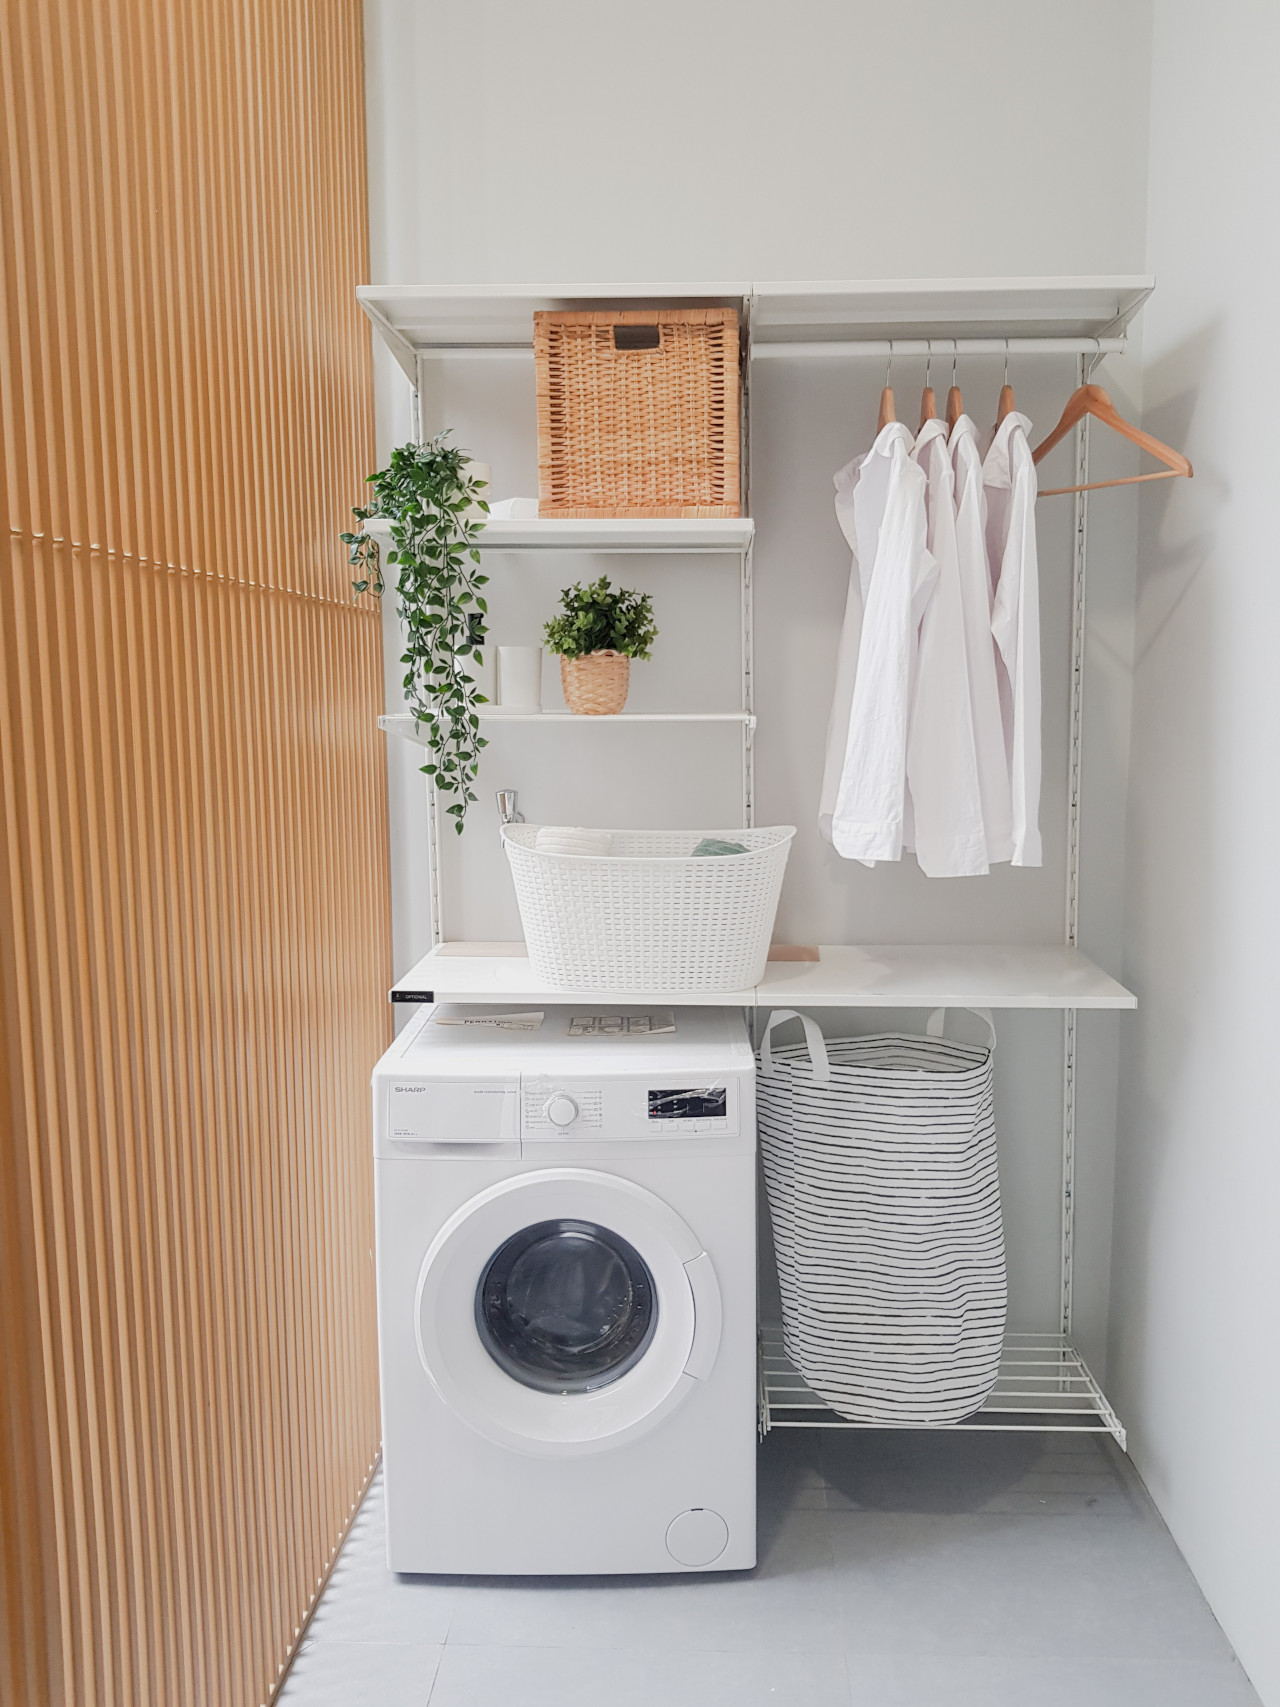 Room Divider, Baskets, Shelving and Clothes on Hangers in a Small Laundry Room